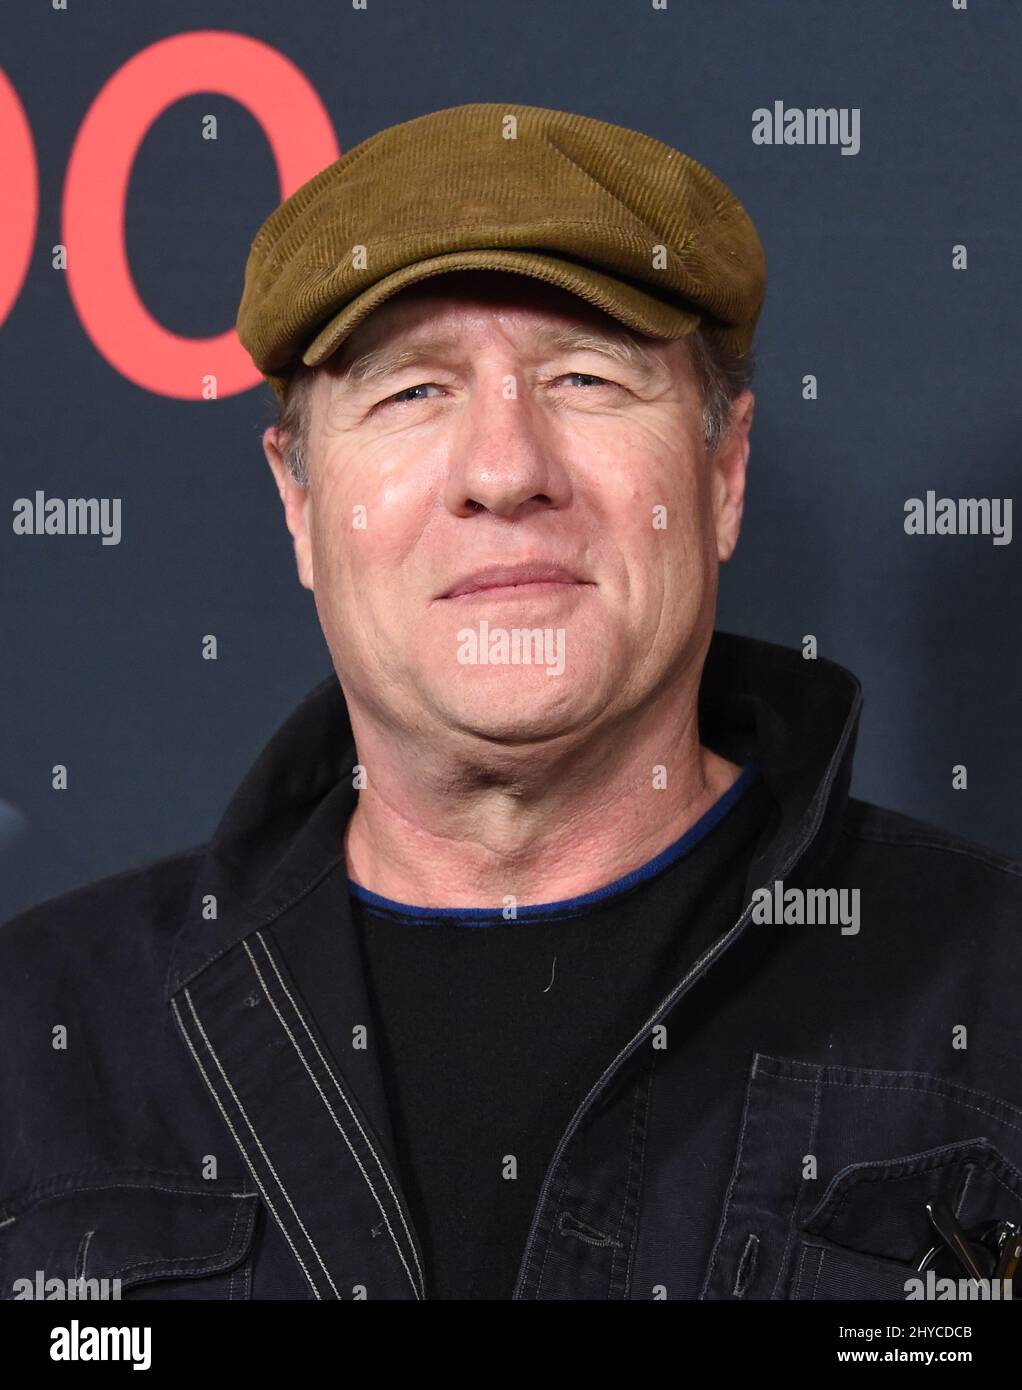 Gregg Henry the 100th Episode celebration of Scandal, in Los Angeles, California Stock Photo